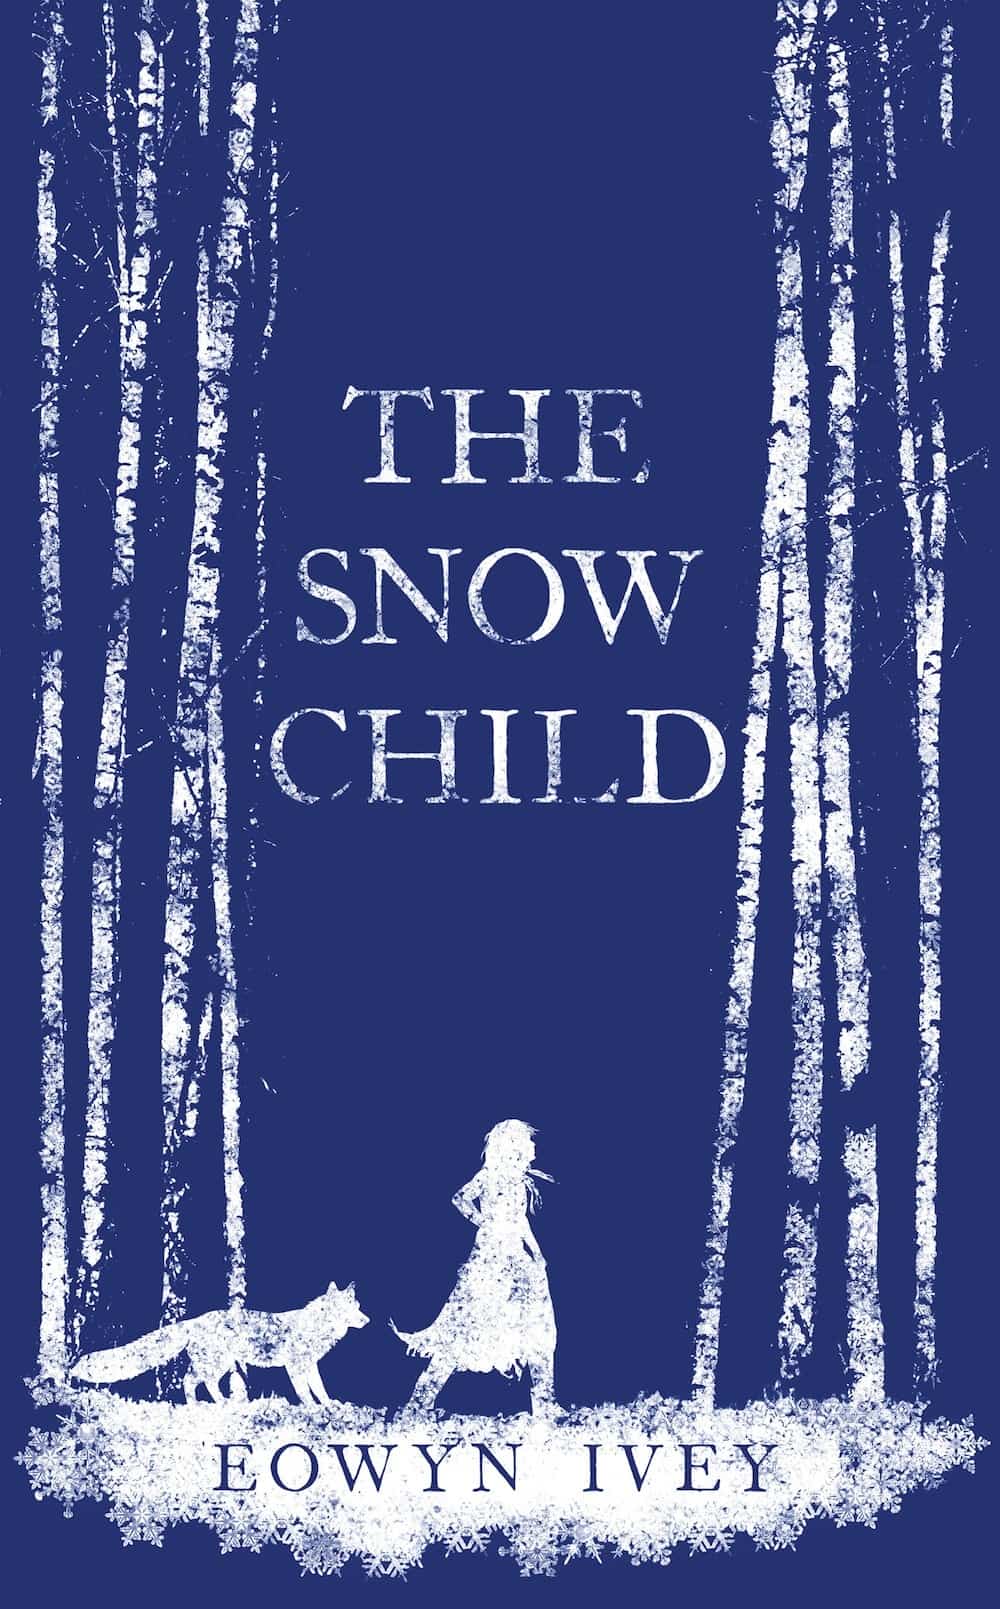 Eowyn-Ivey-The-Snow-Child